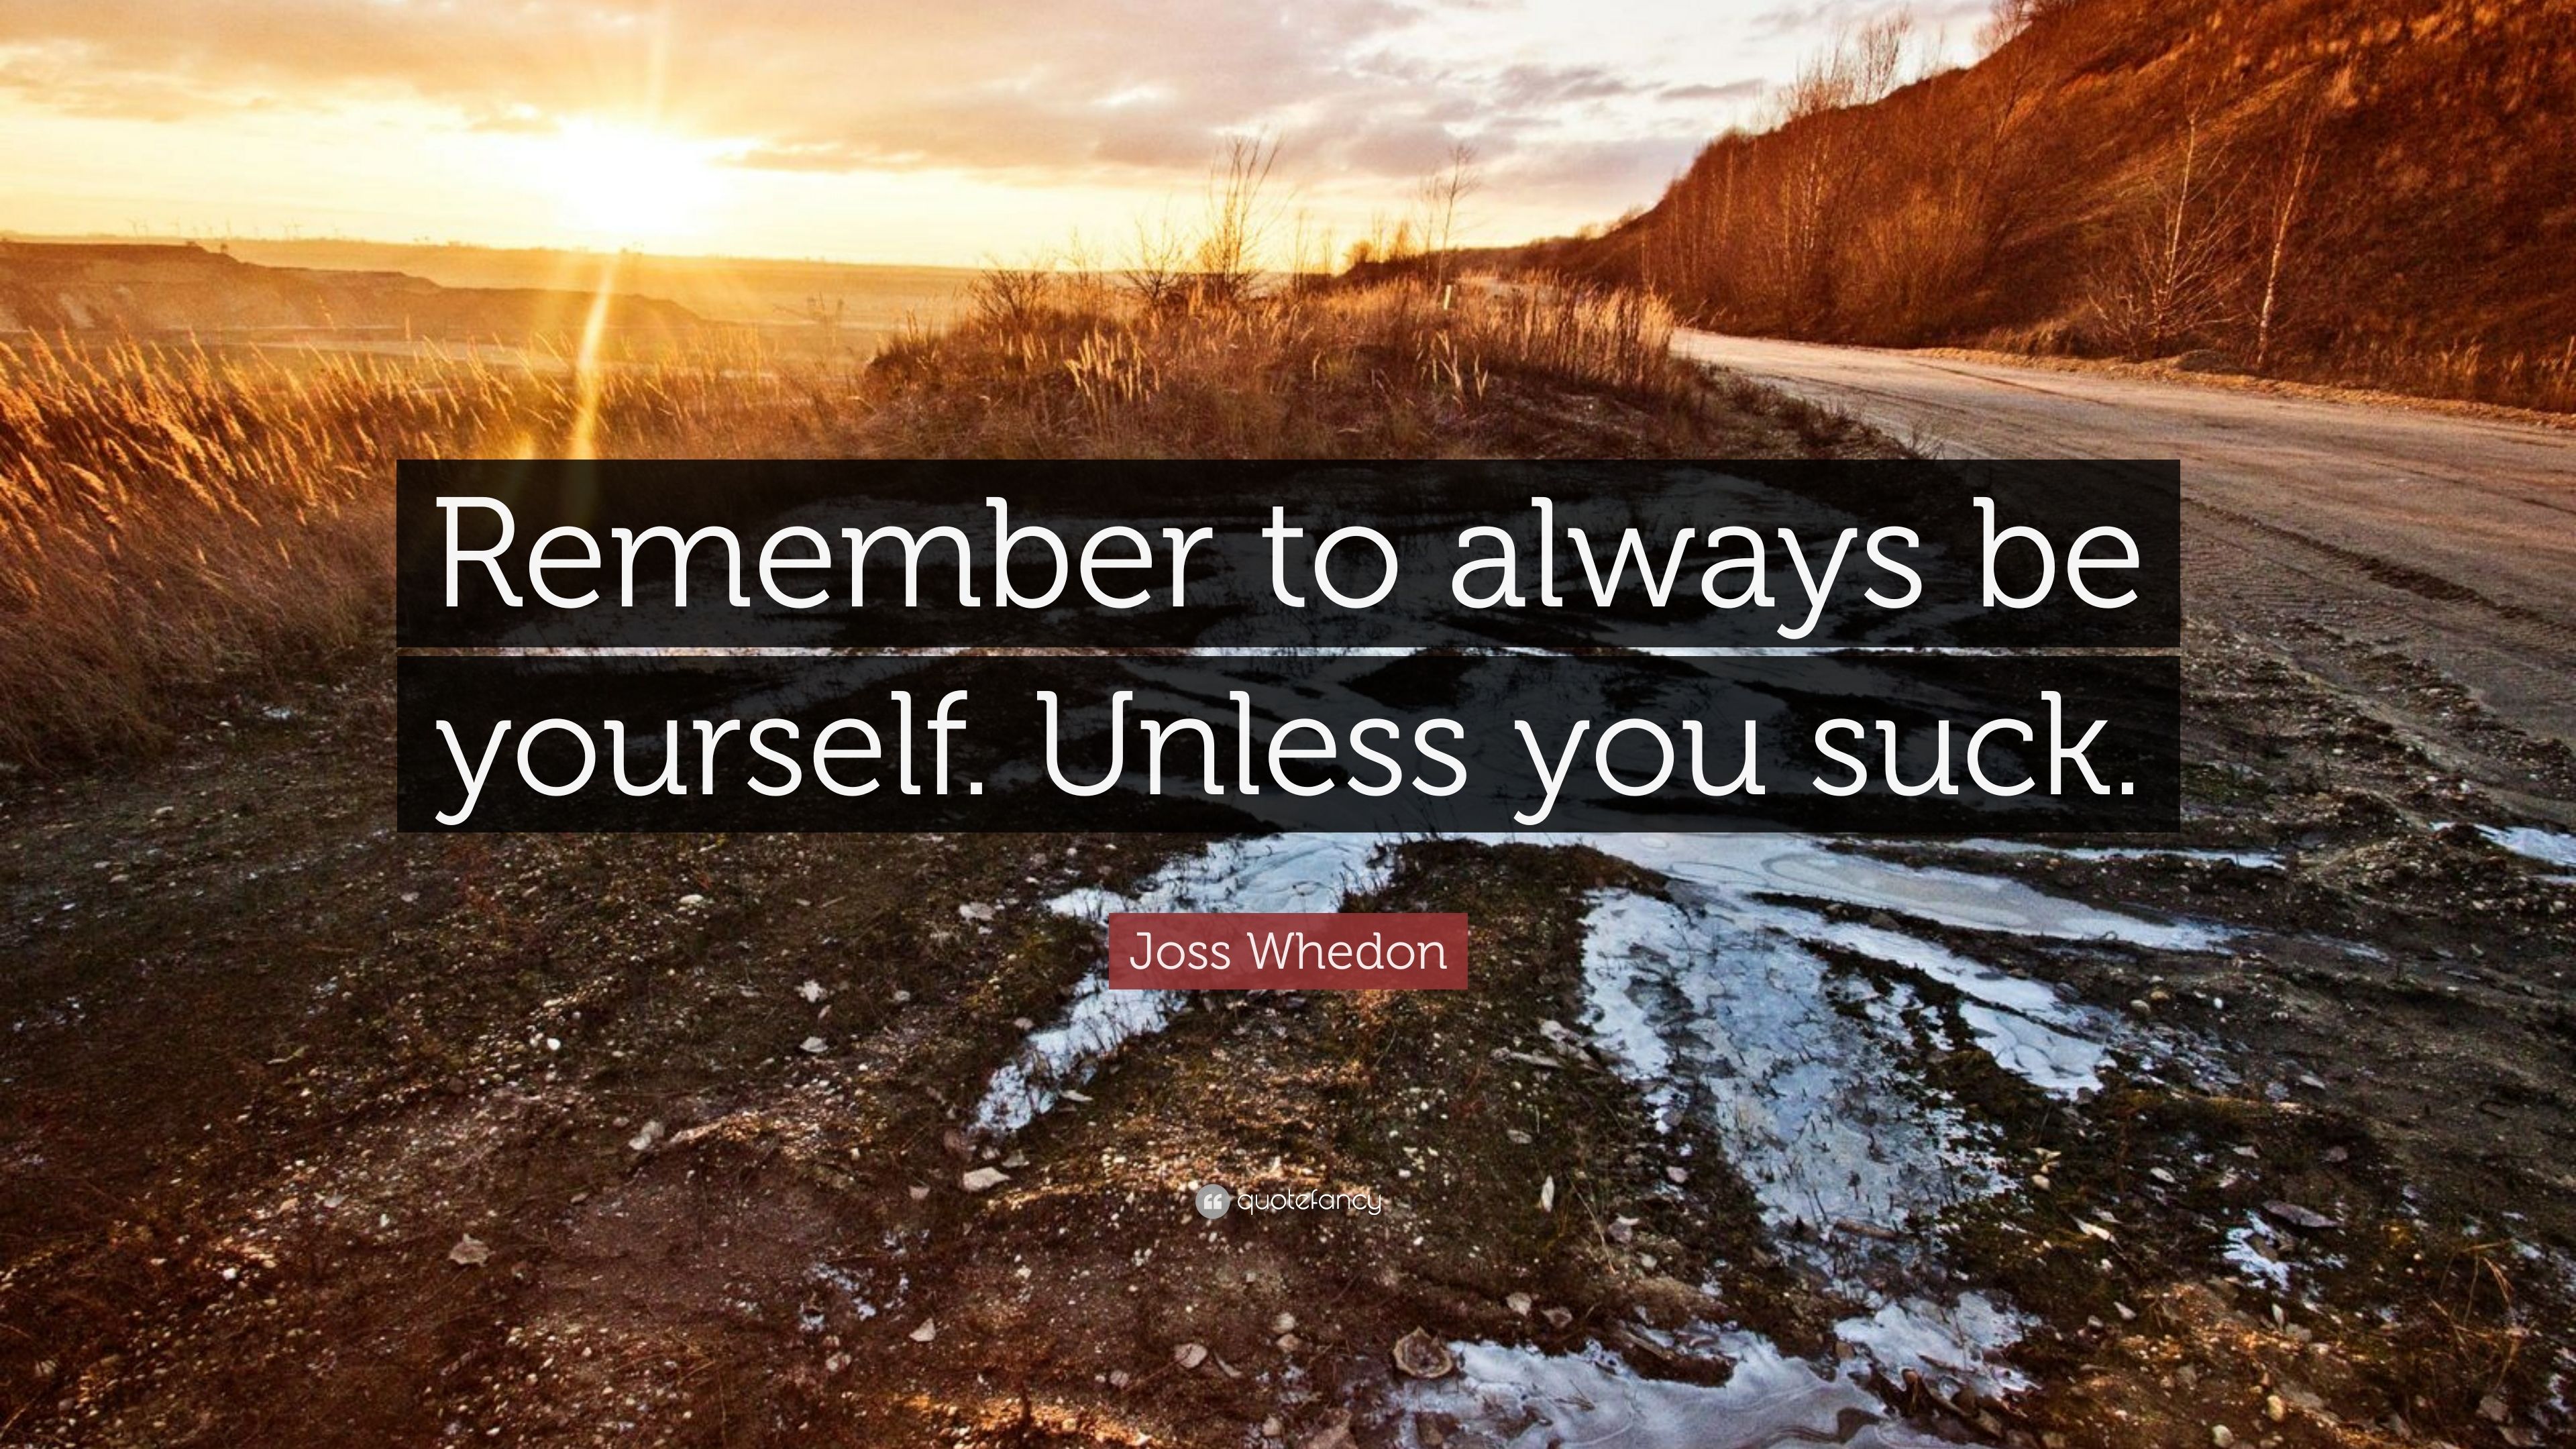 Joss Whedon Quote: “Remember to always be yourself. Unless you suck.” (11 wallpaper)